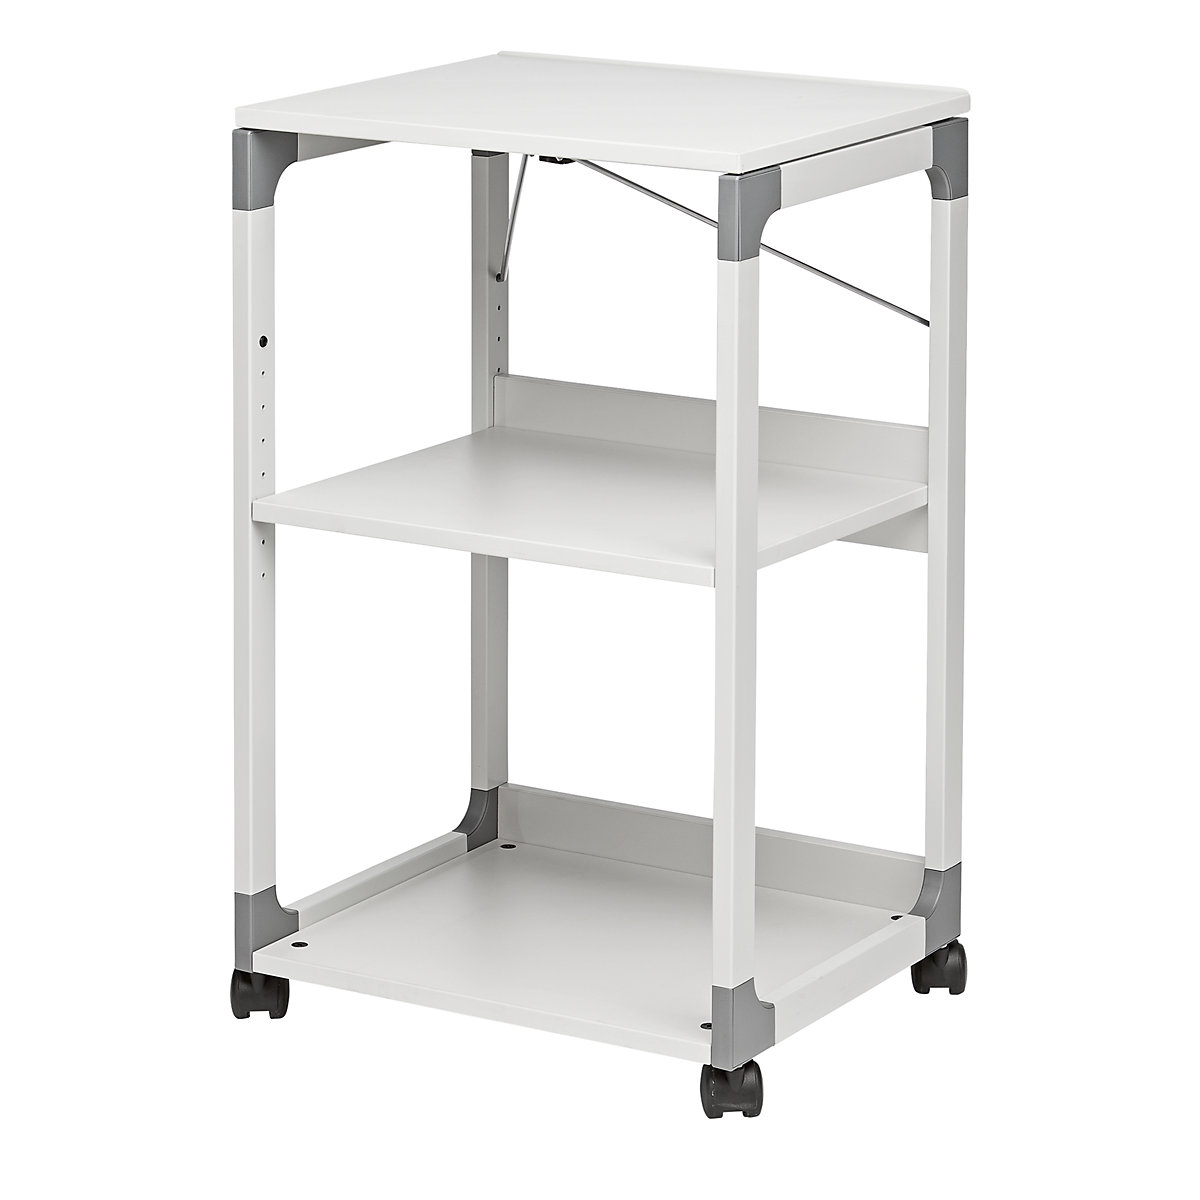 OHP / projector trolley - DURABLE